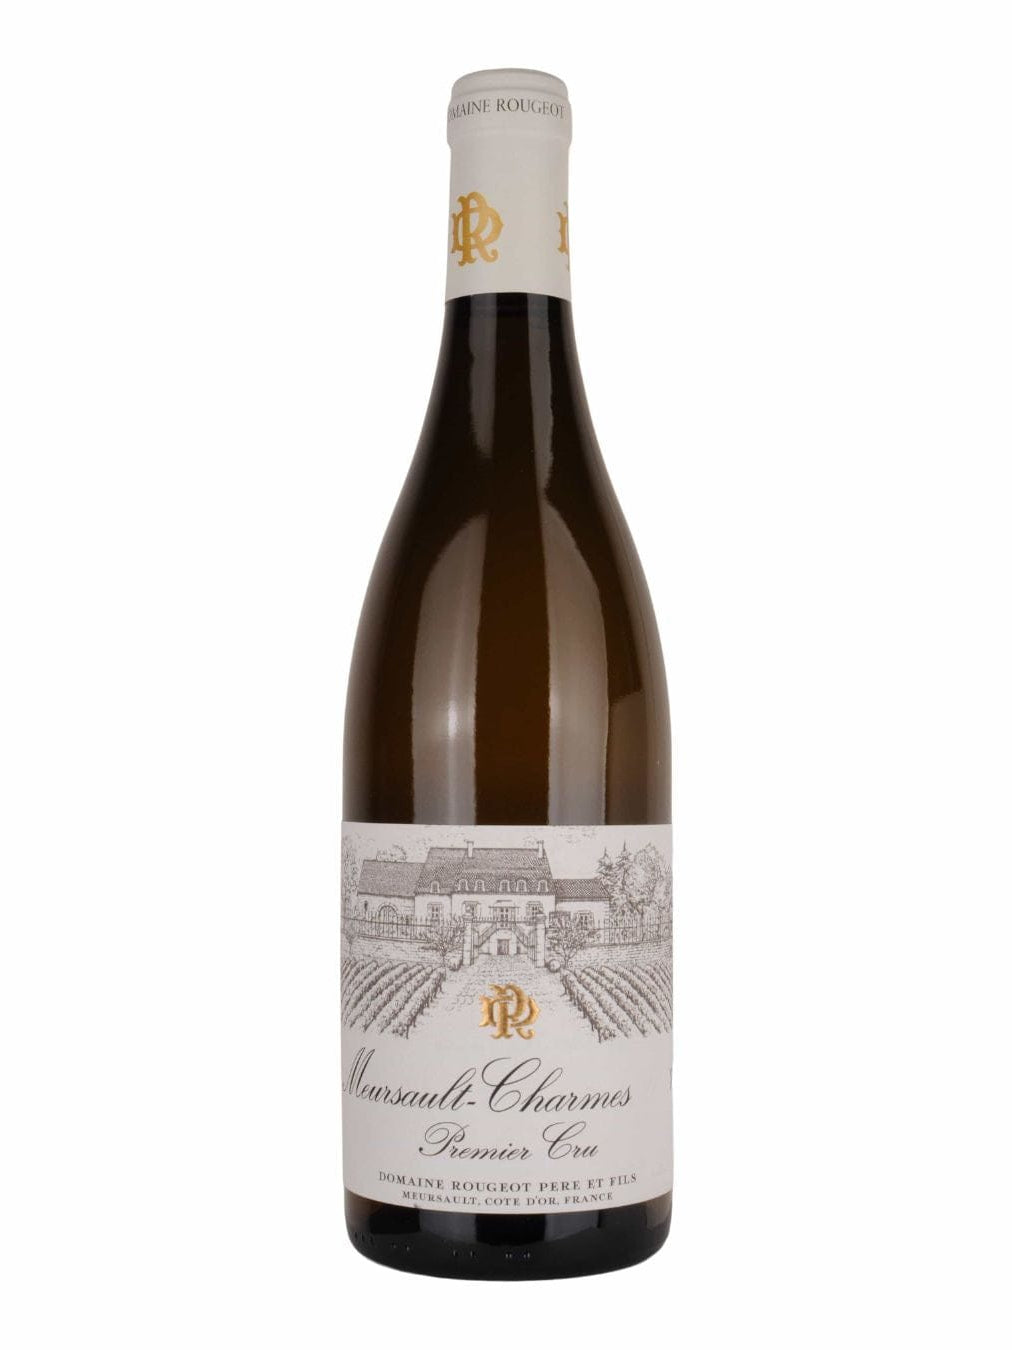 Shop Domaine Rougeot Père & Fils Domaine Rougeot Père & Fils Meursault-Charmes 1er Cru 2020 online at PENTICTON artisanal French wine store in Hong Kong. Discover other French wines, promotions, workshops and featured offers at pentictonpacific.com 